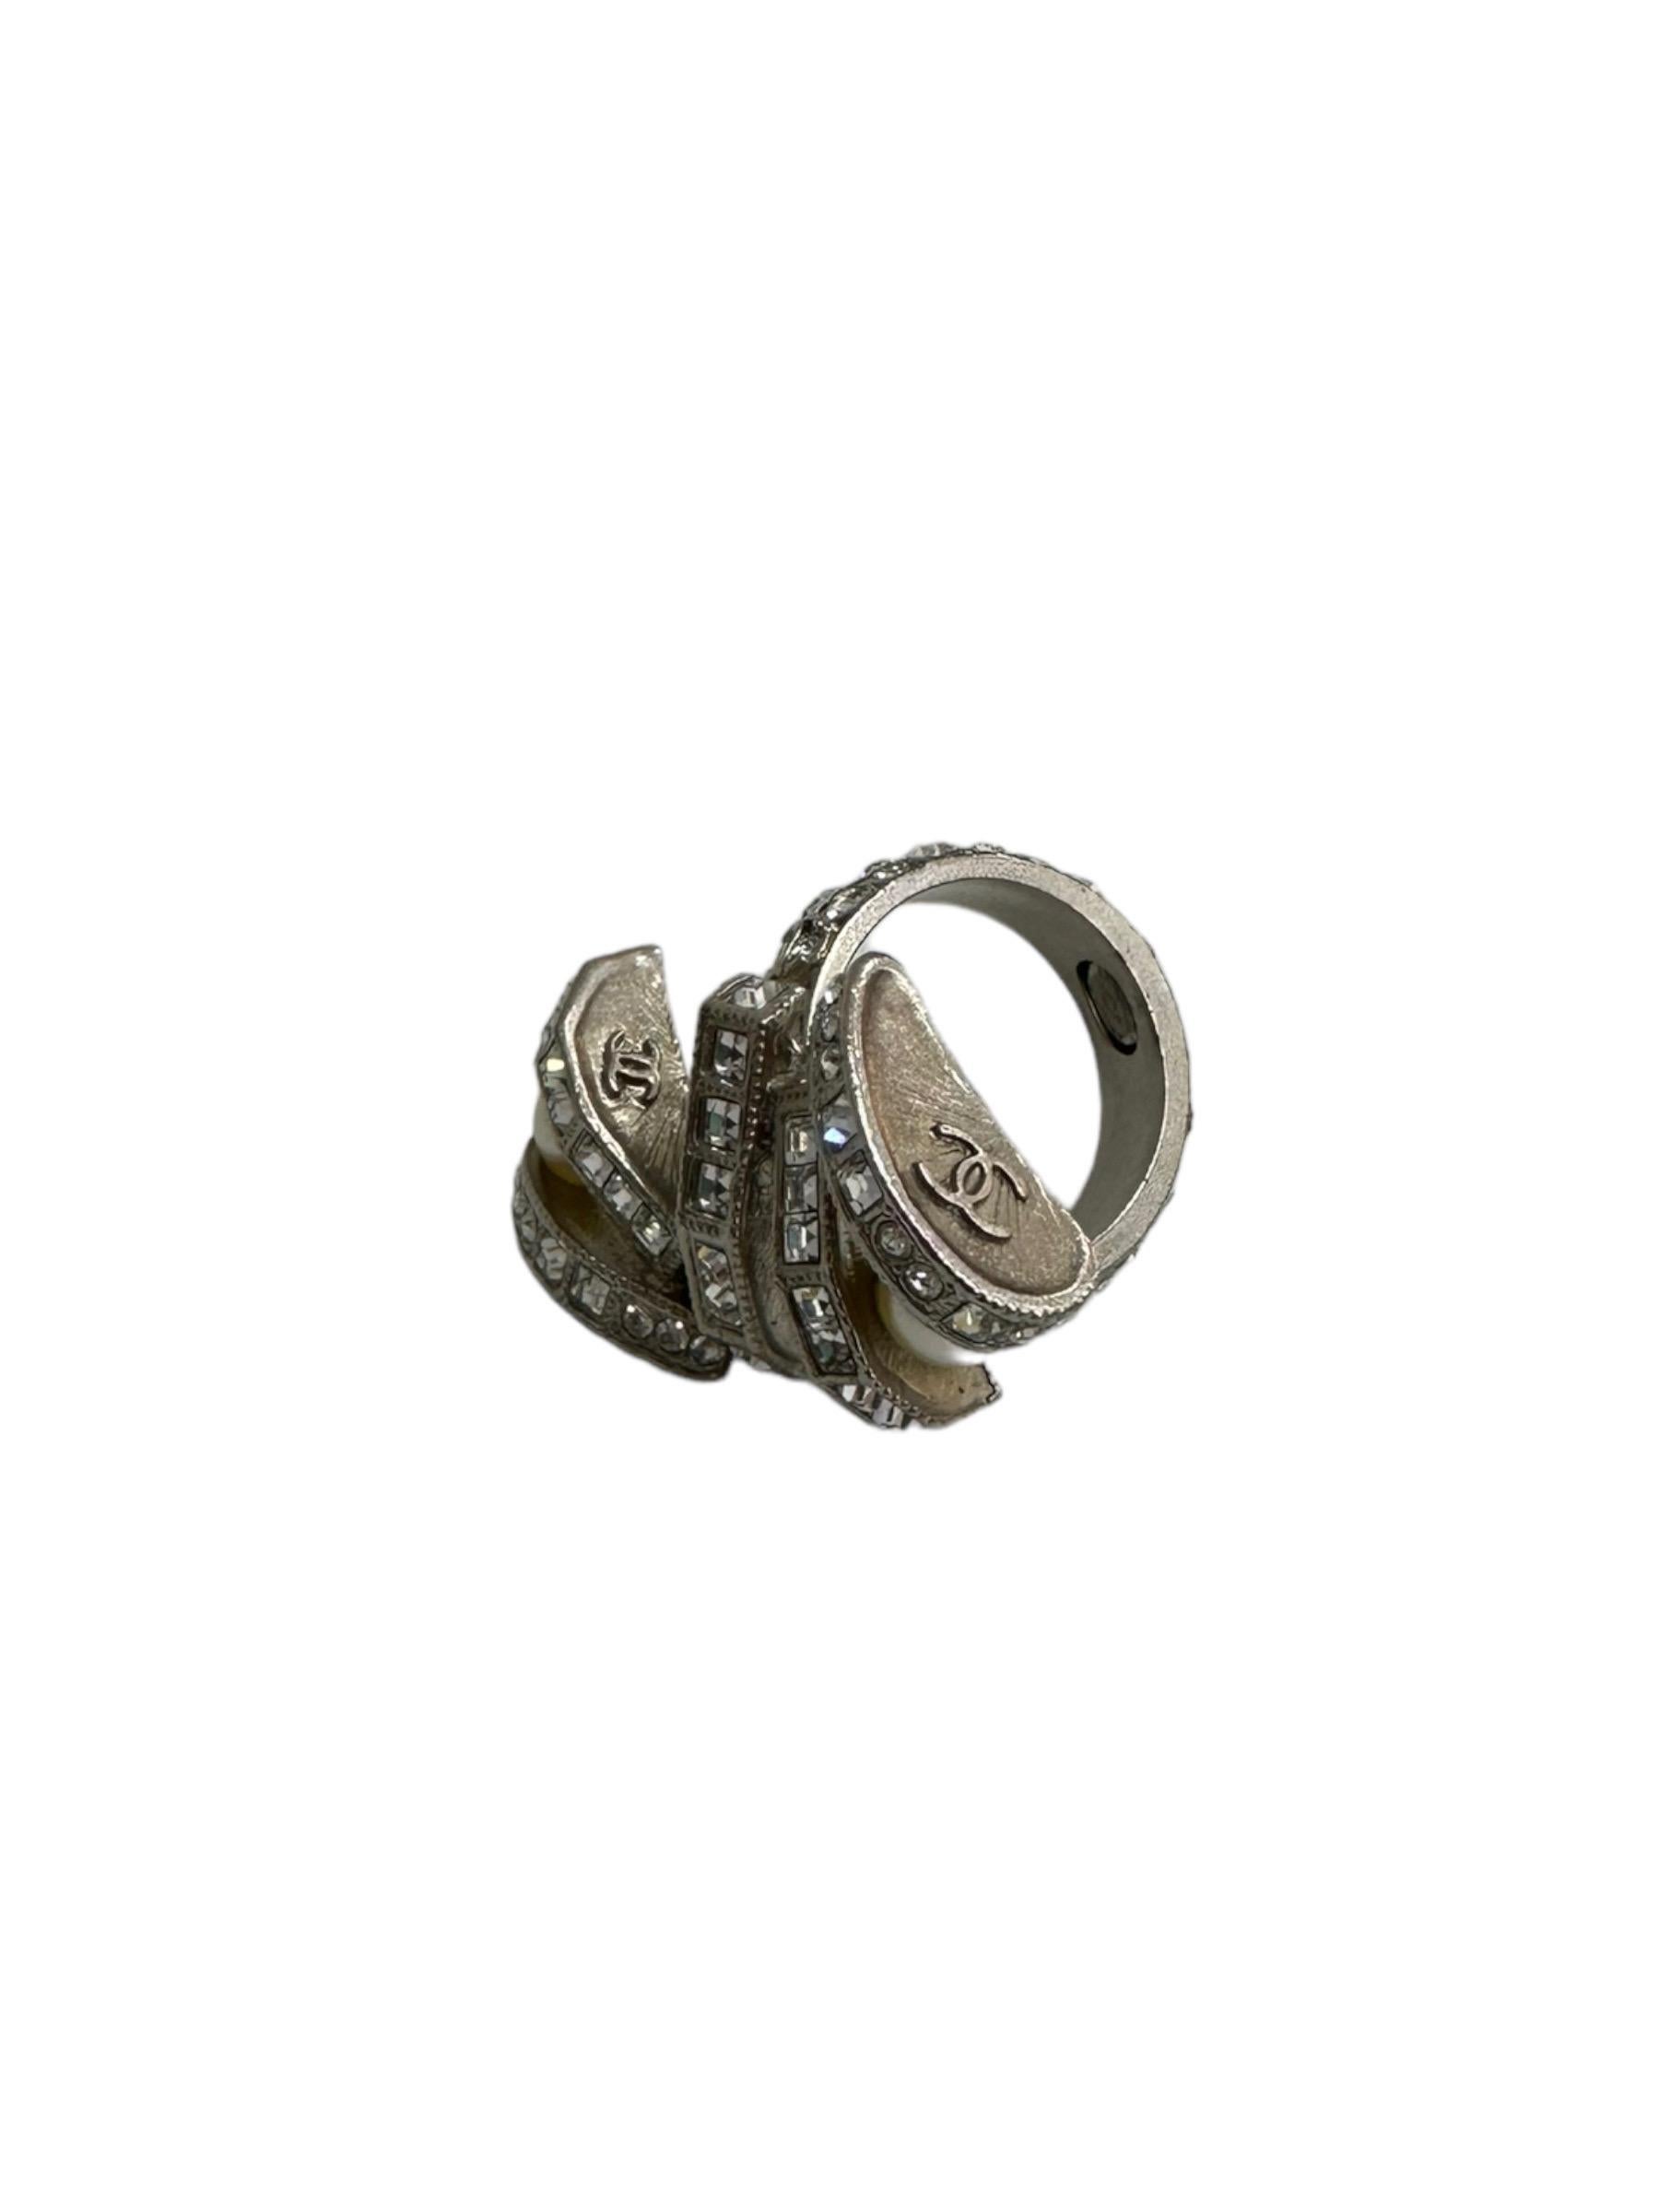 Chanel signed ring, made of silver metal, covered with rhinestones and small pearls. It seems in perfect conditions.

